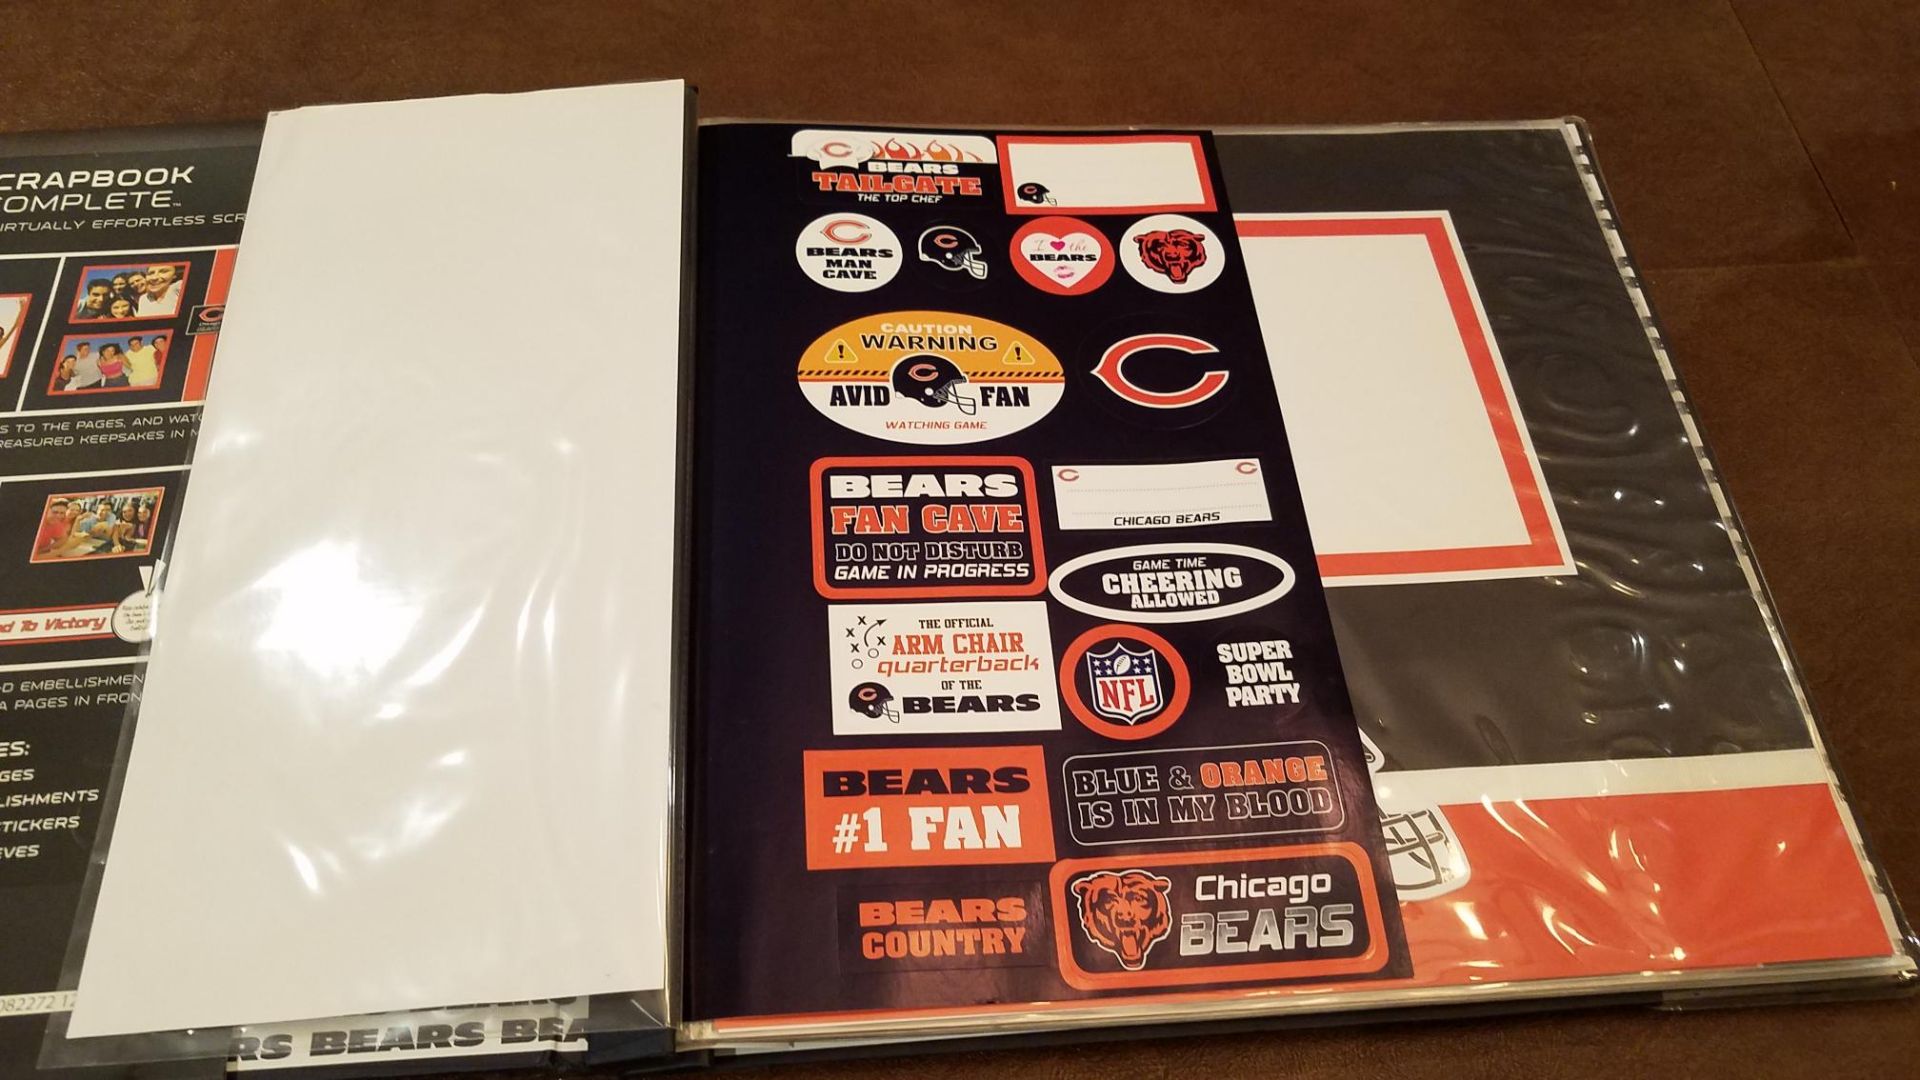 Chicago Bears 16-Page Scrapbook (Still in Protective Plastic) - Image 4 of 14